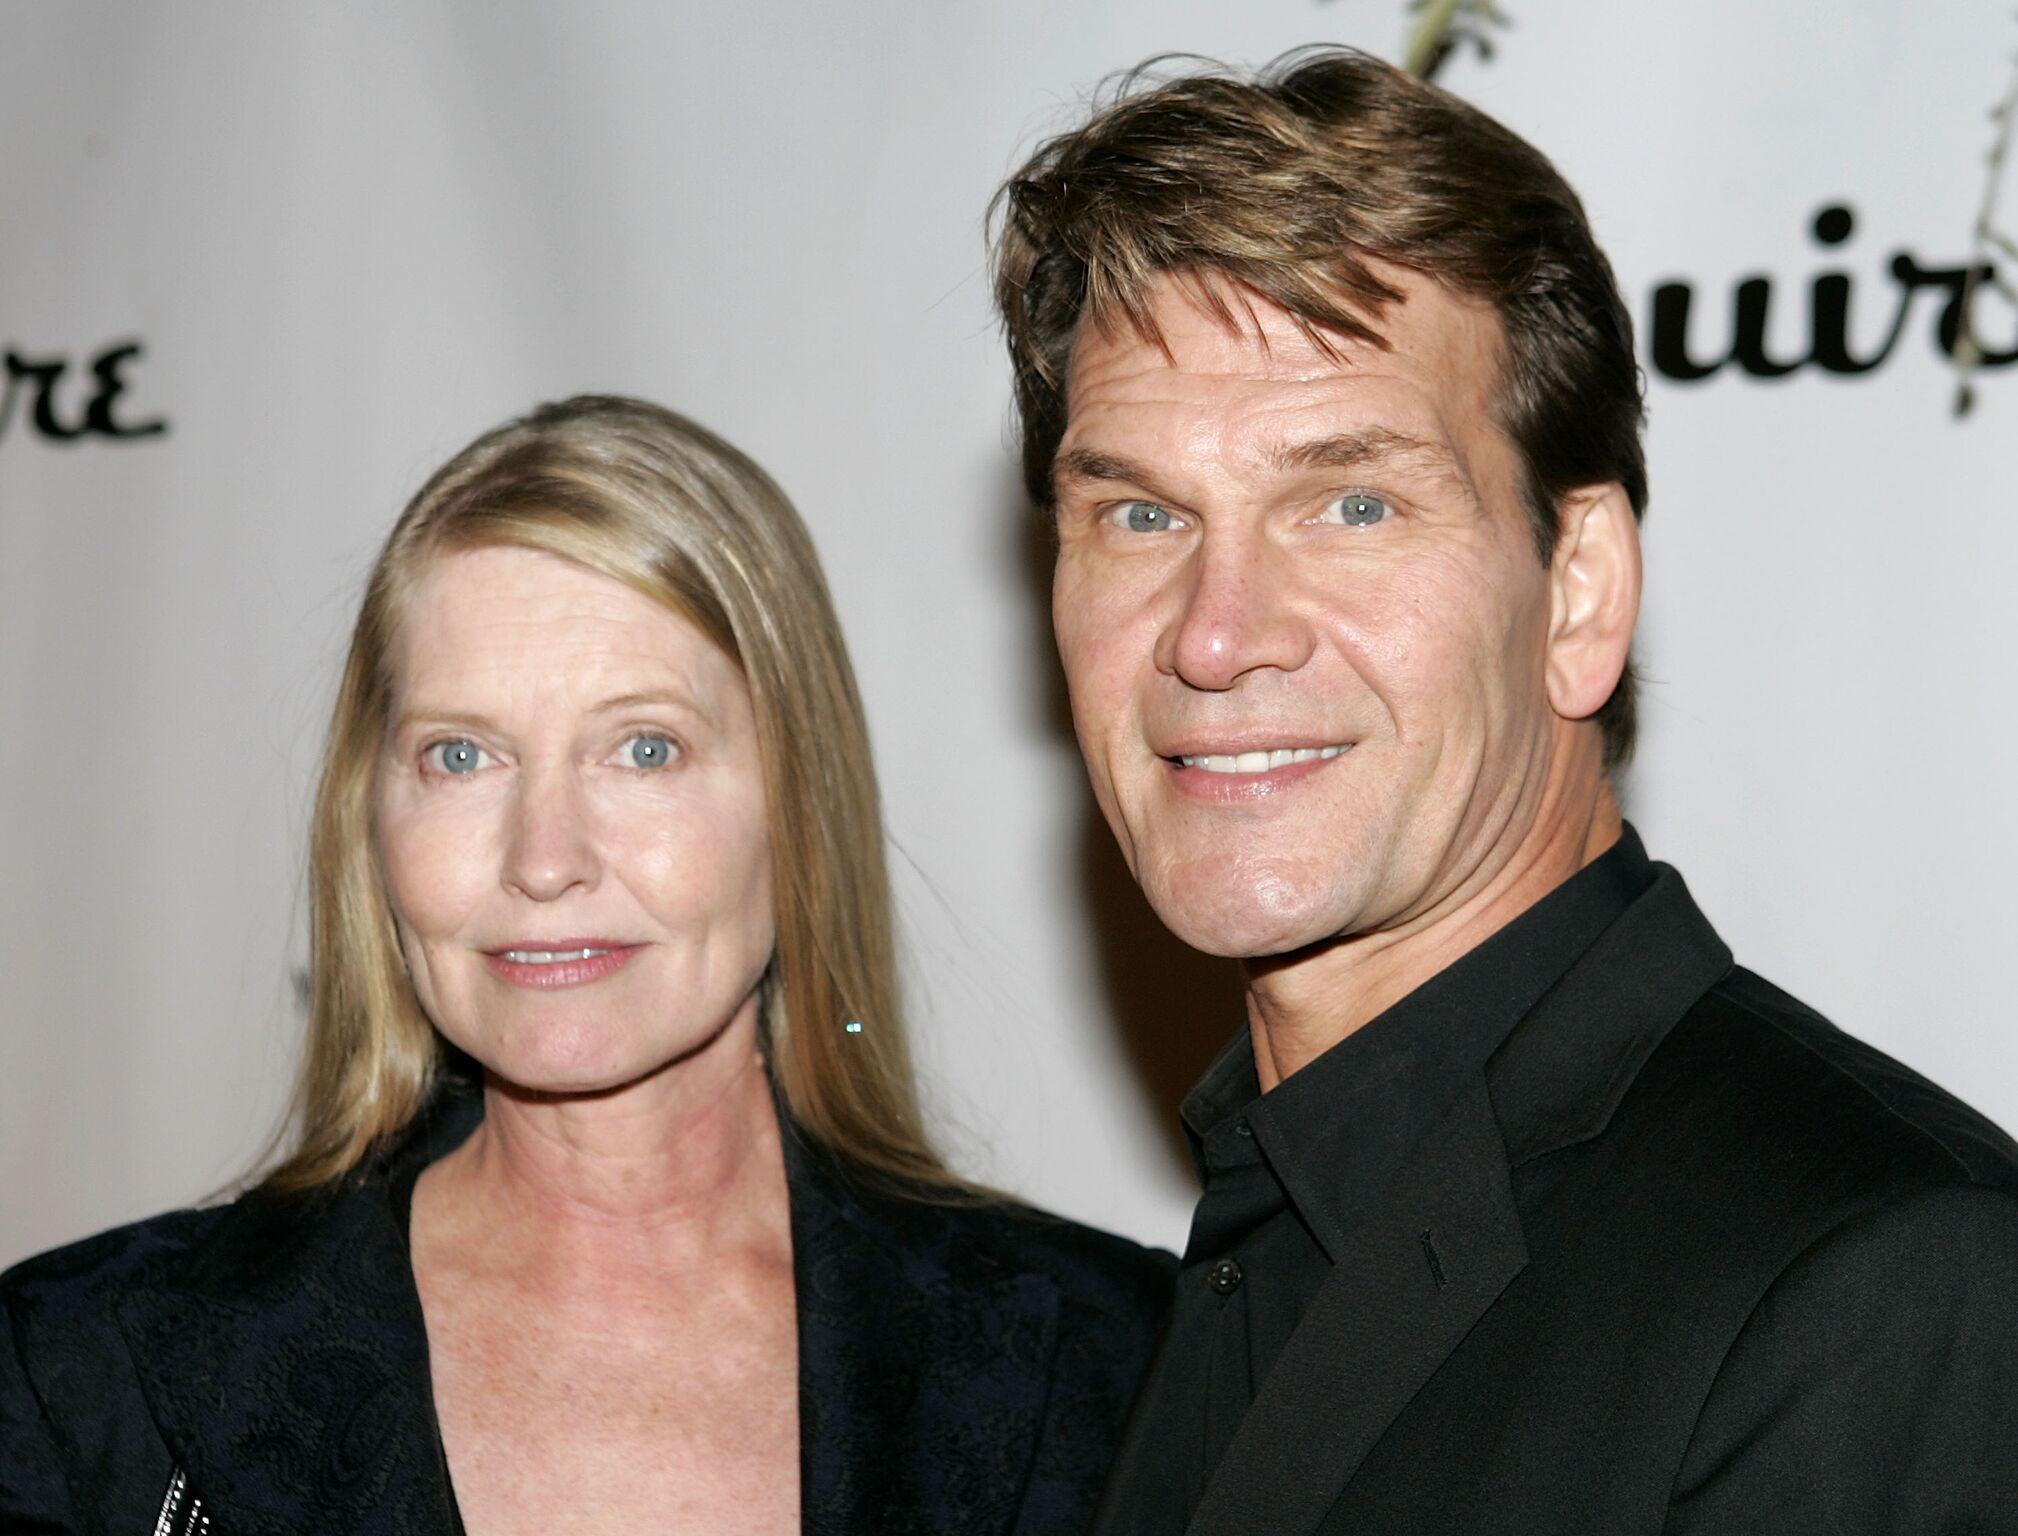  Patrick Swayze and his wife Lisa Niemi arrive for the 2nd Annual Ocean Partners Awards Gala in 2004 | Getty Images